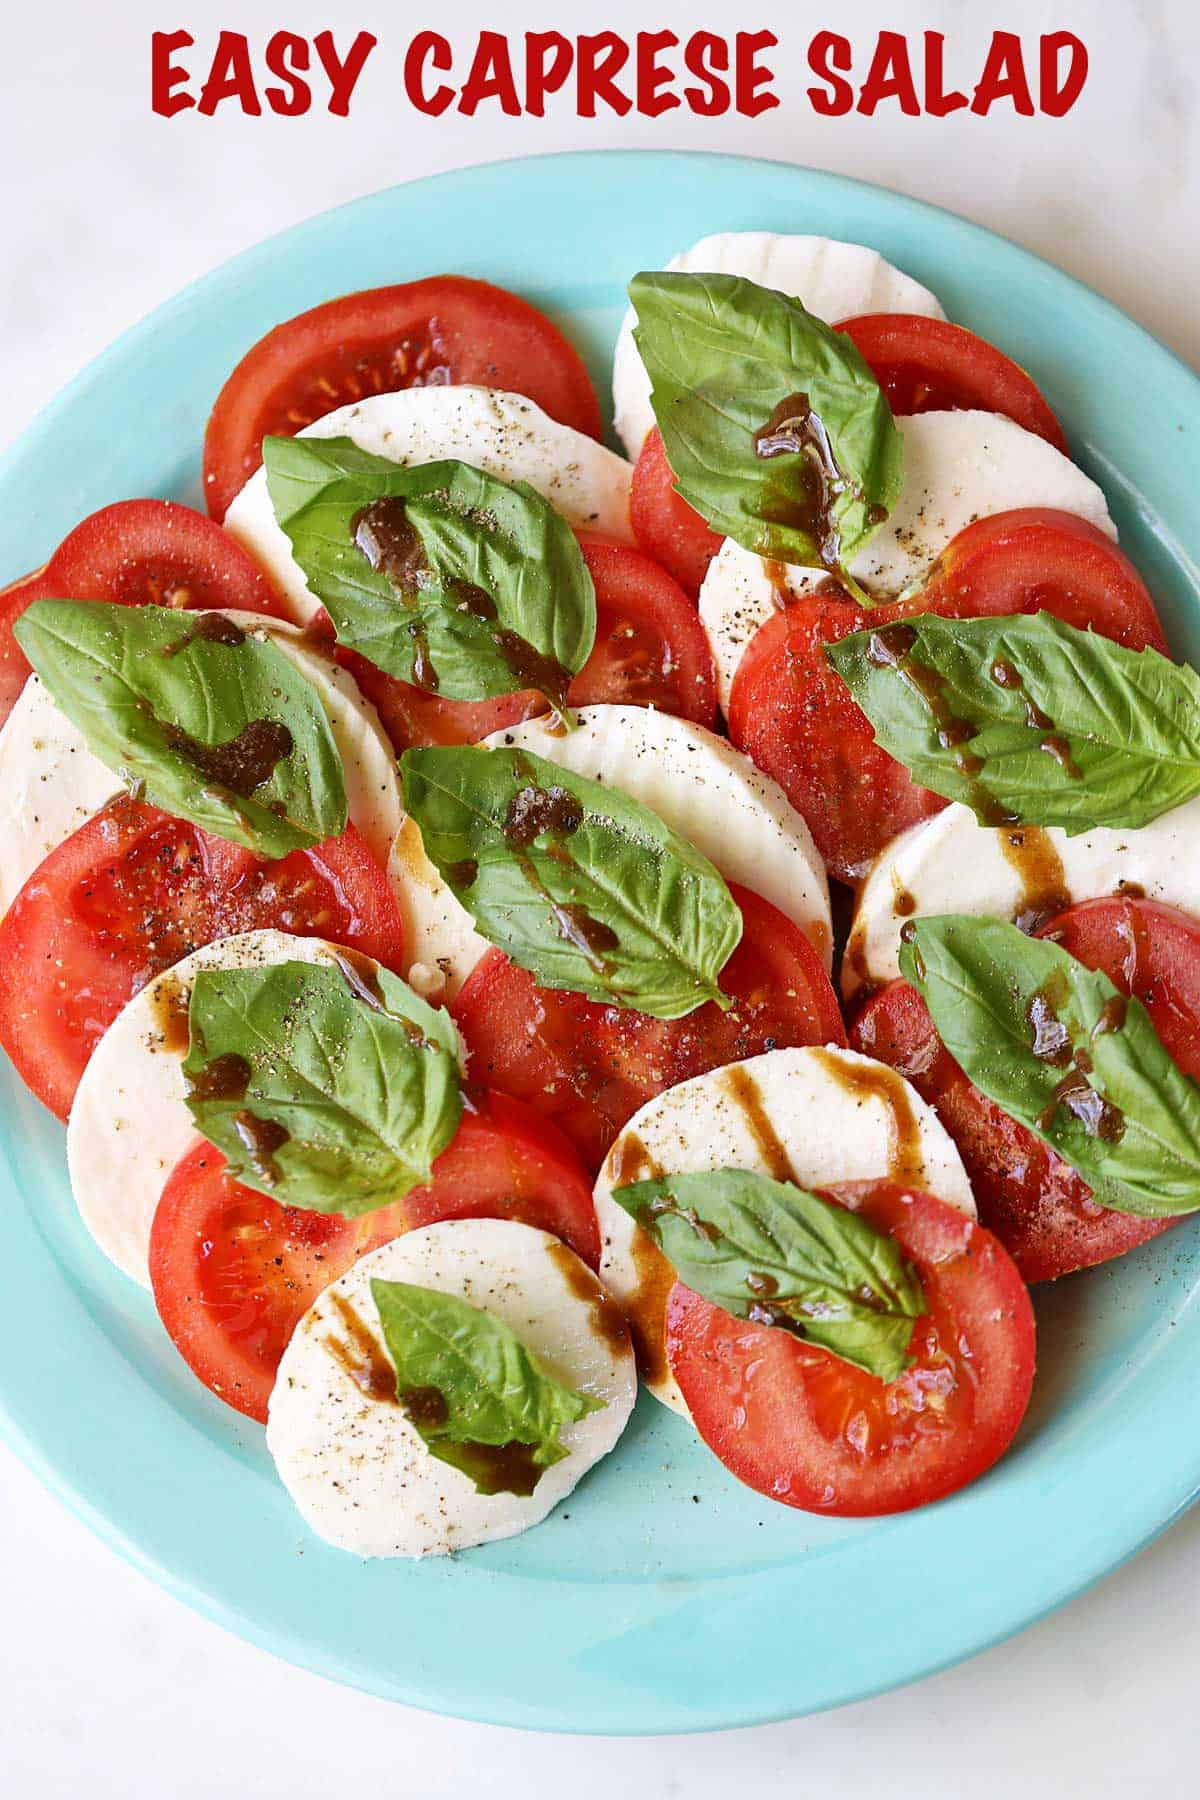 Caprese salad with tomato slices and mozzarella cheese is served on a green plate.